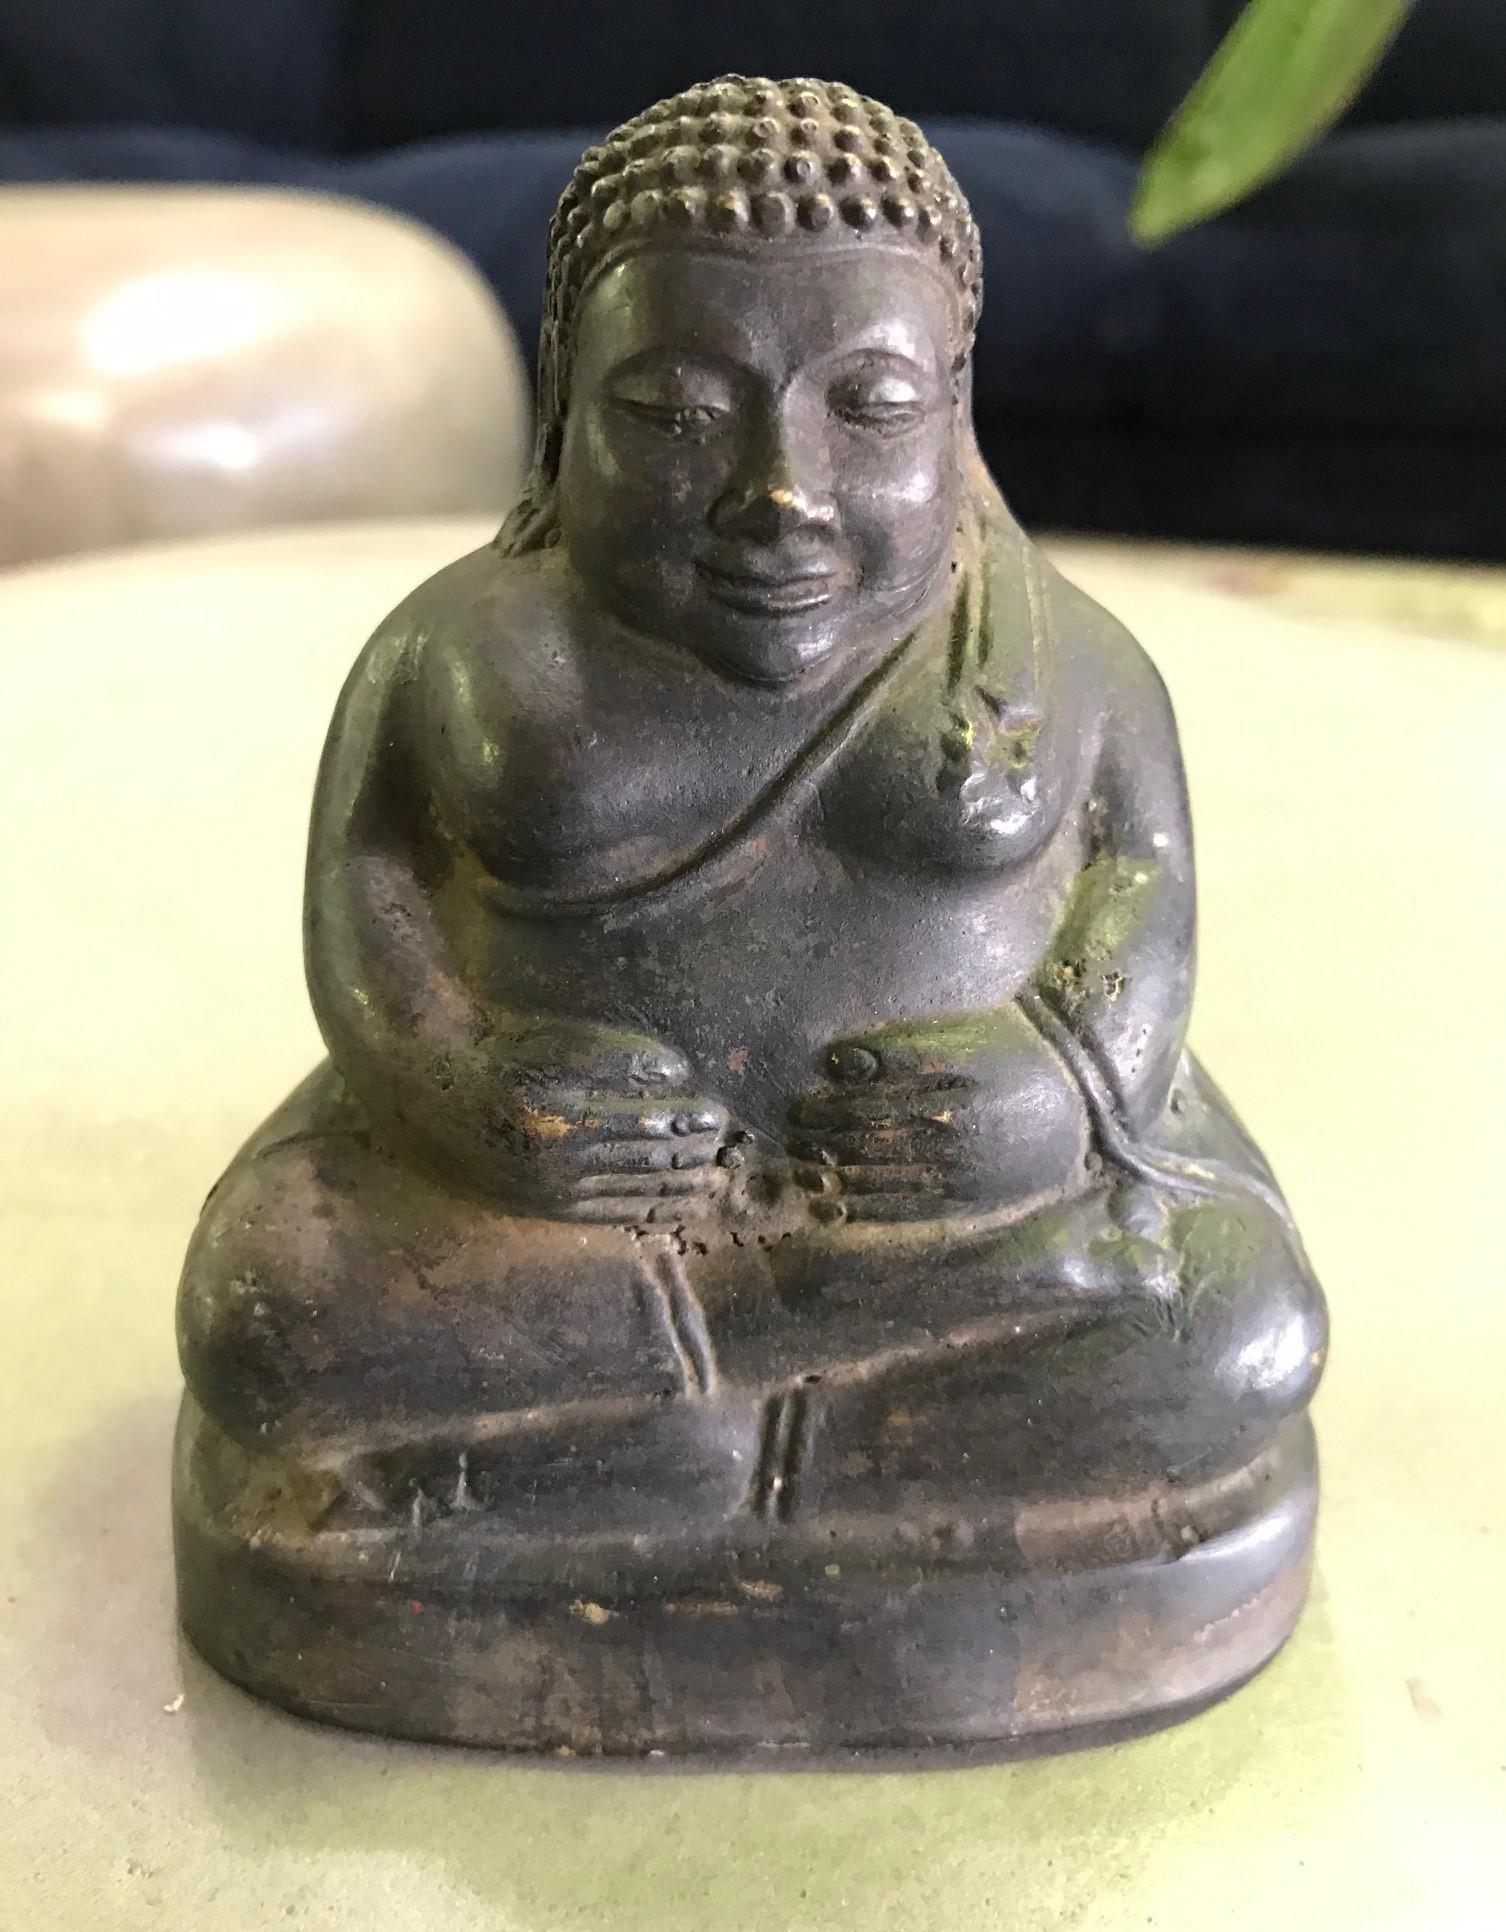 A wonderful, gem of a piece. The piece has a beautiful feel and heft to it. The laughing or jolly Buddha is known in China as Budai or Putai, Bodai in Vietnamese, and Hotei in Japanese, and are best known for their cheerful nature and good spirits.